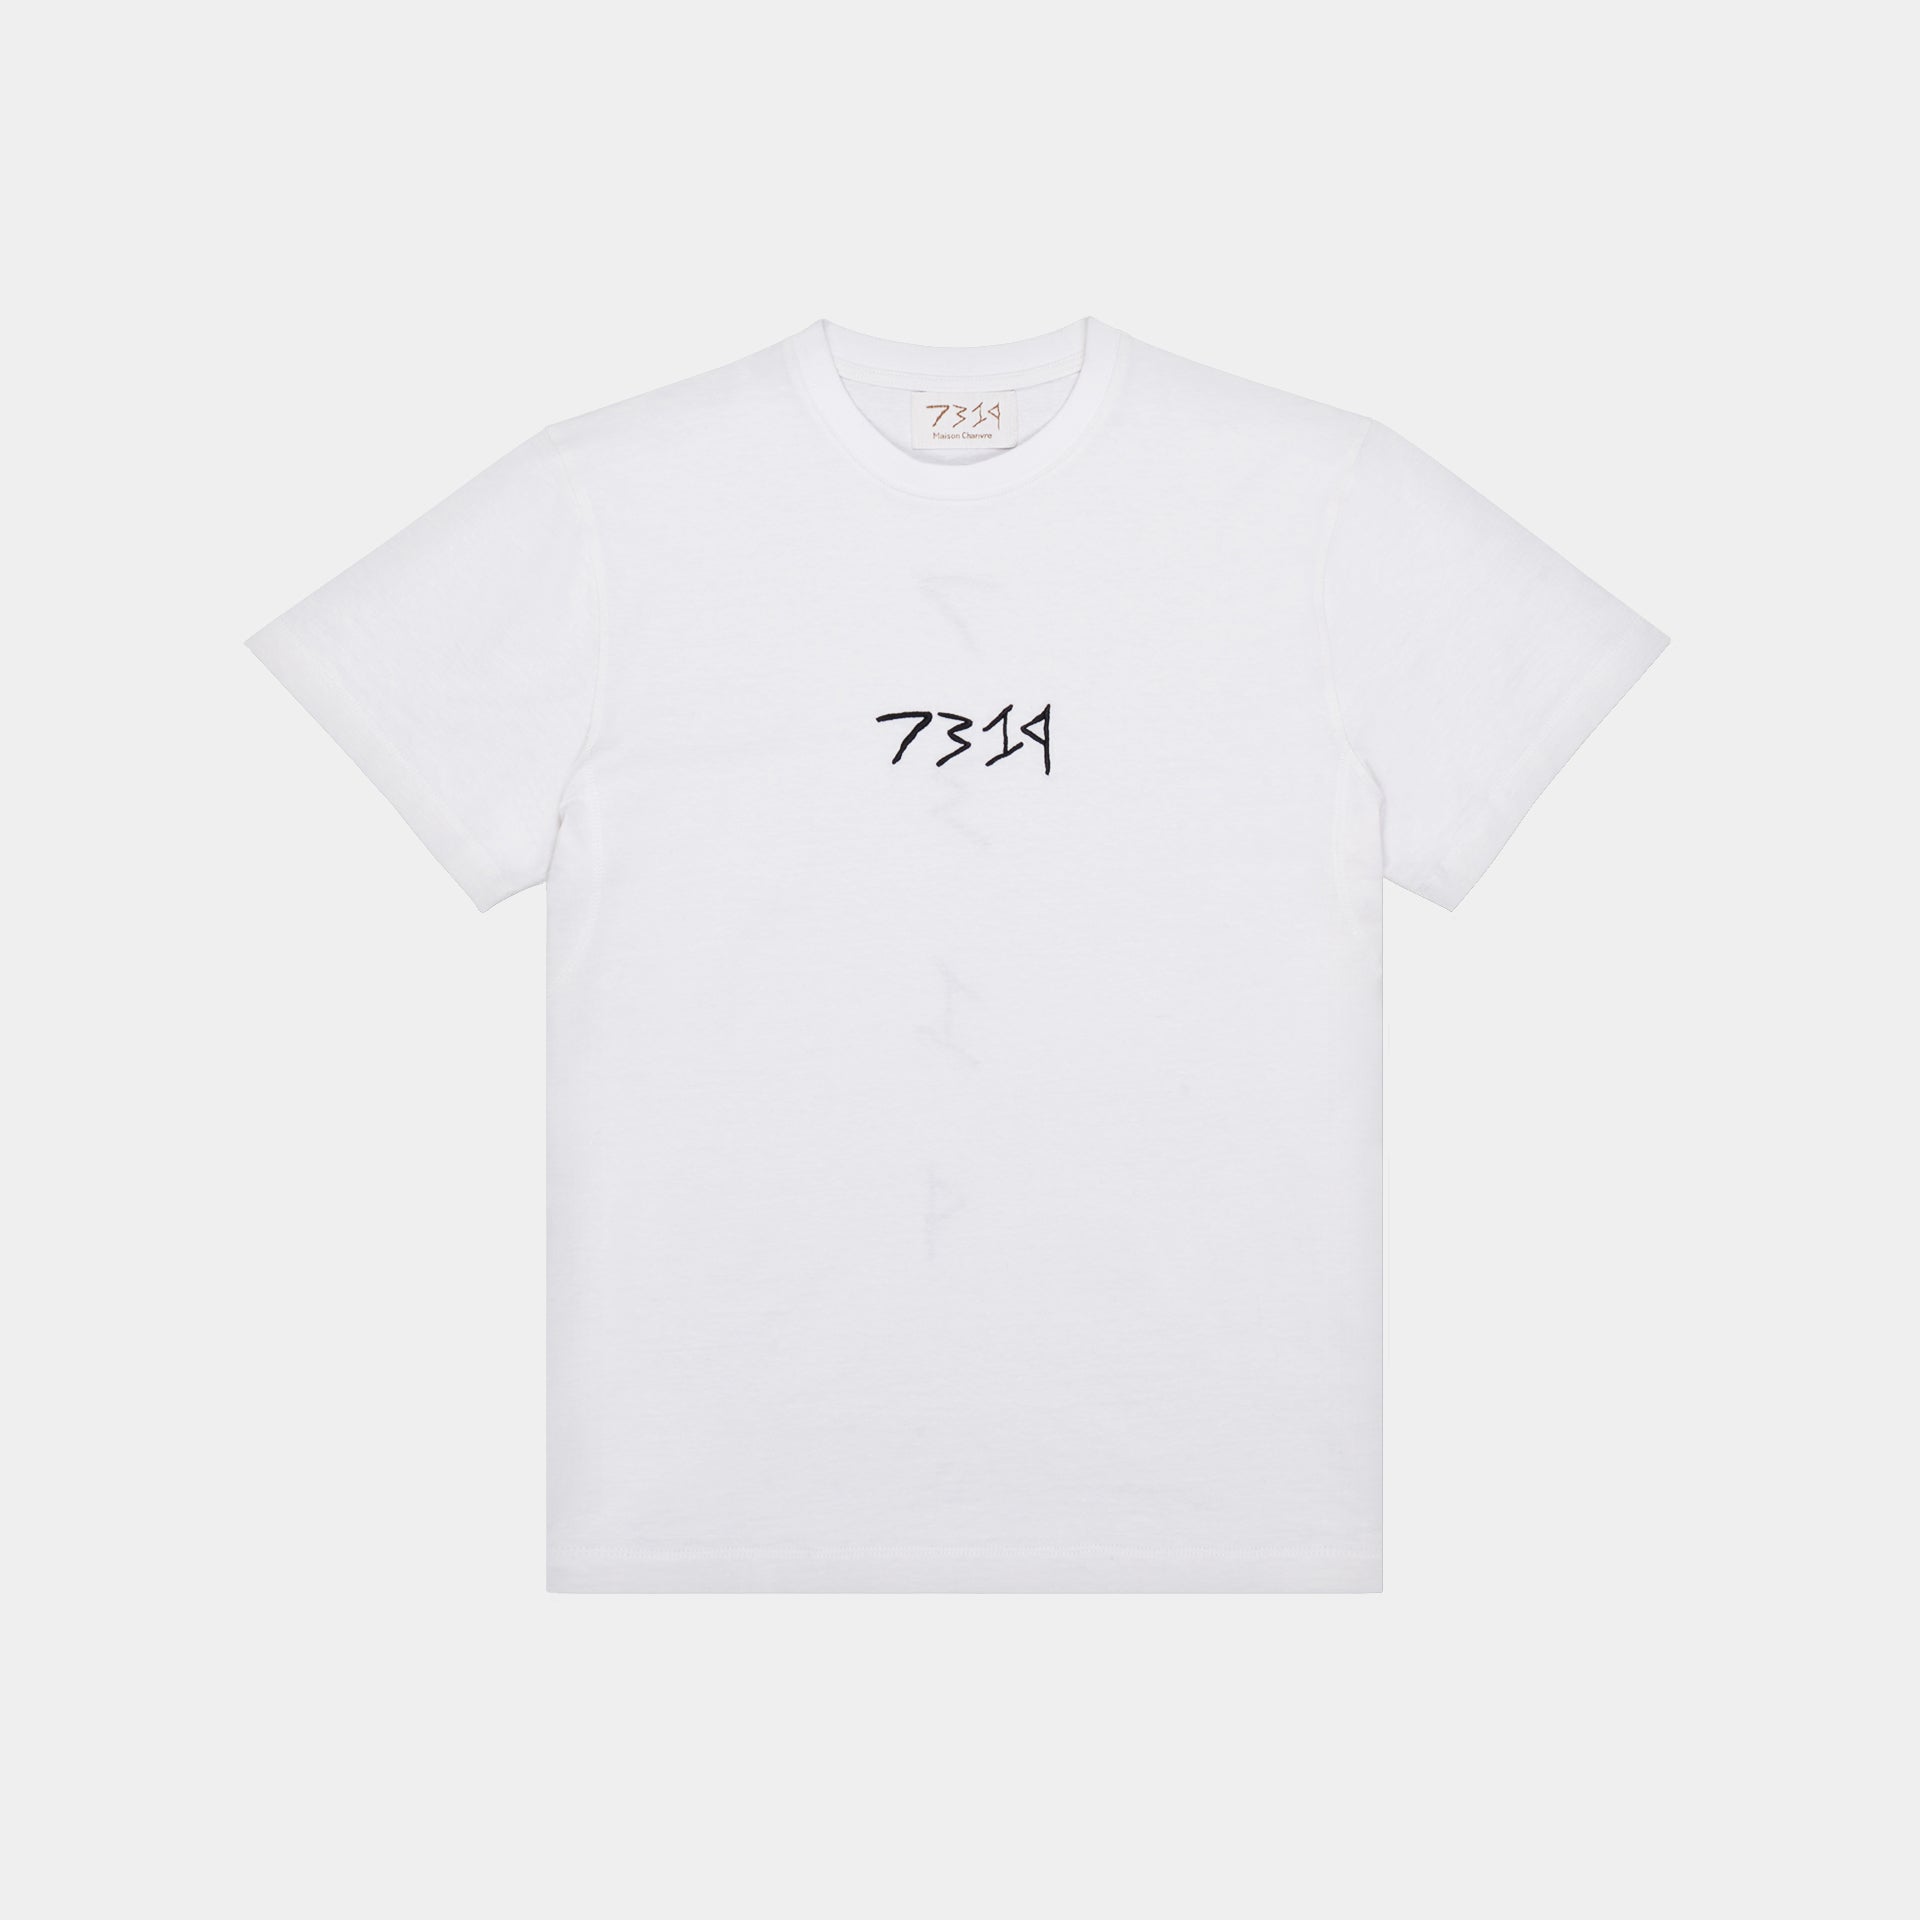 white hemp t-shirt with 7319 embroidered logo in black. Front view. Sustainable street style.